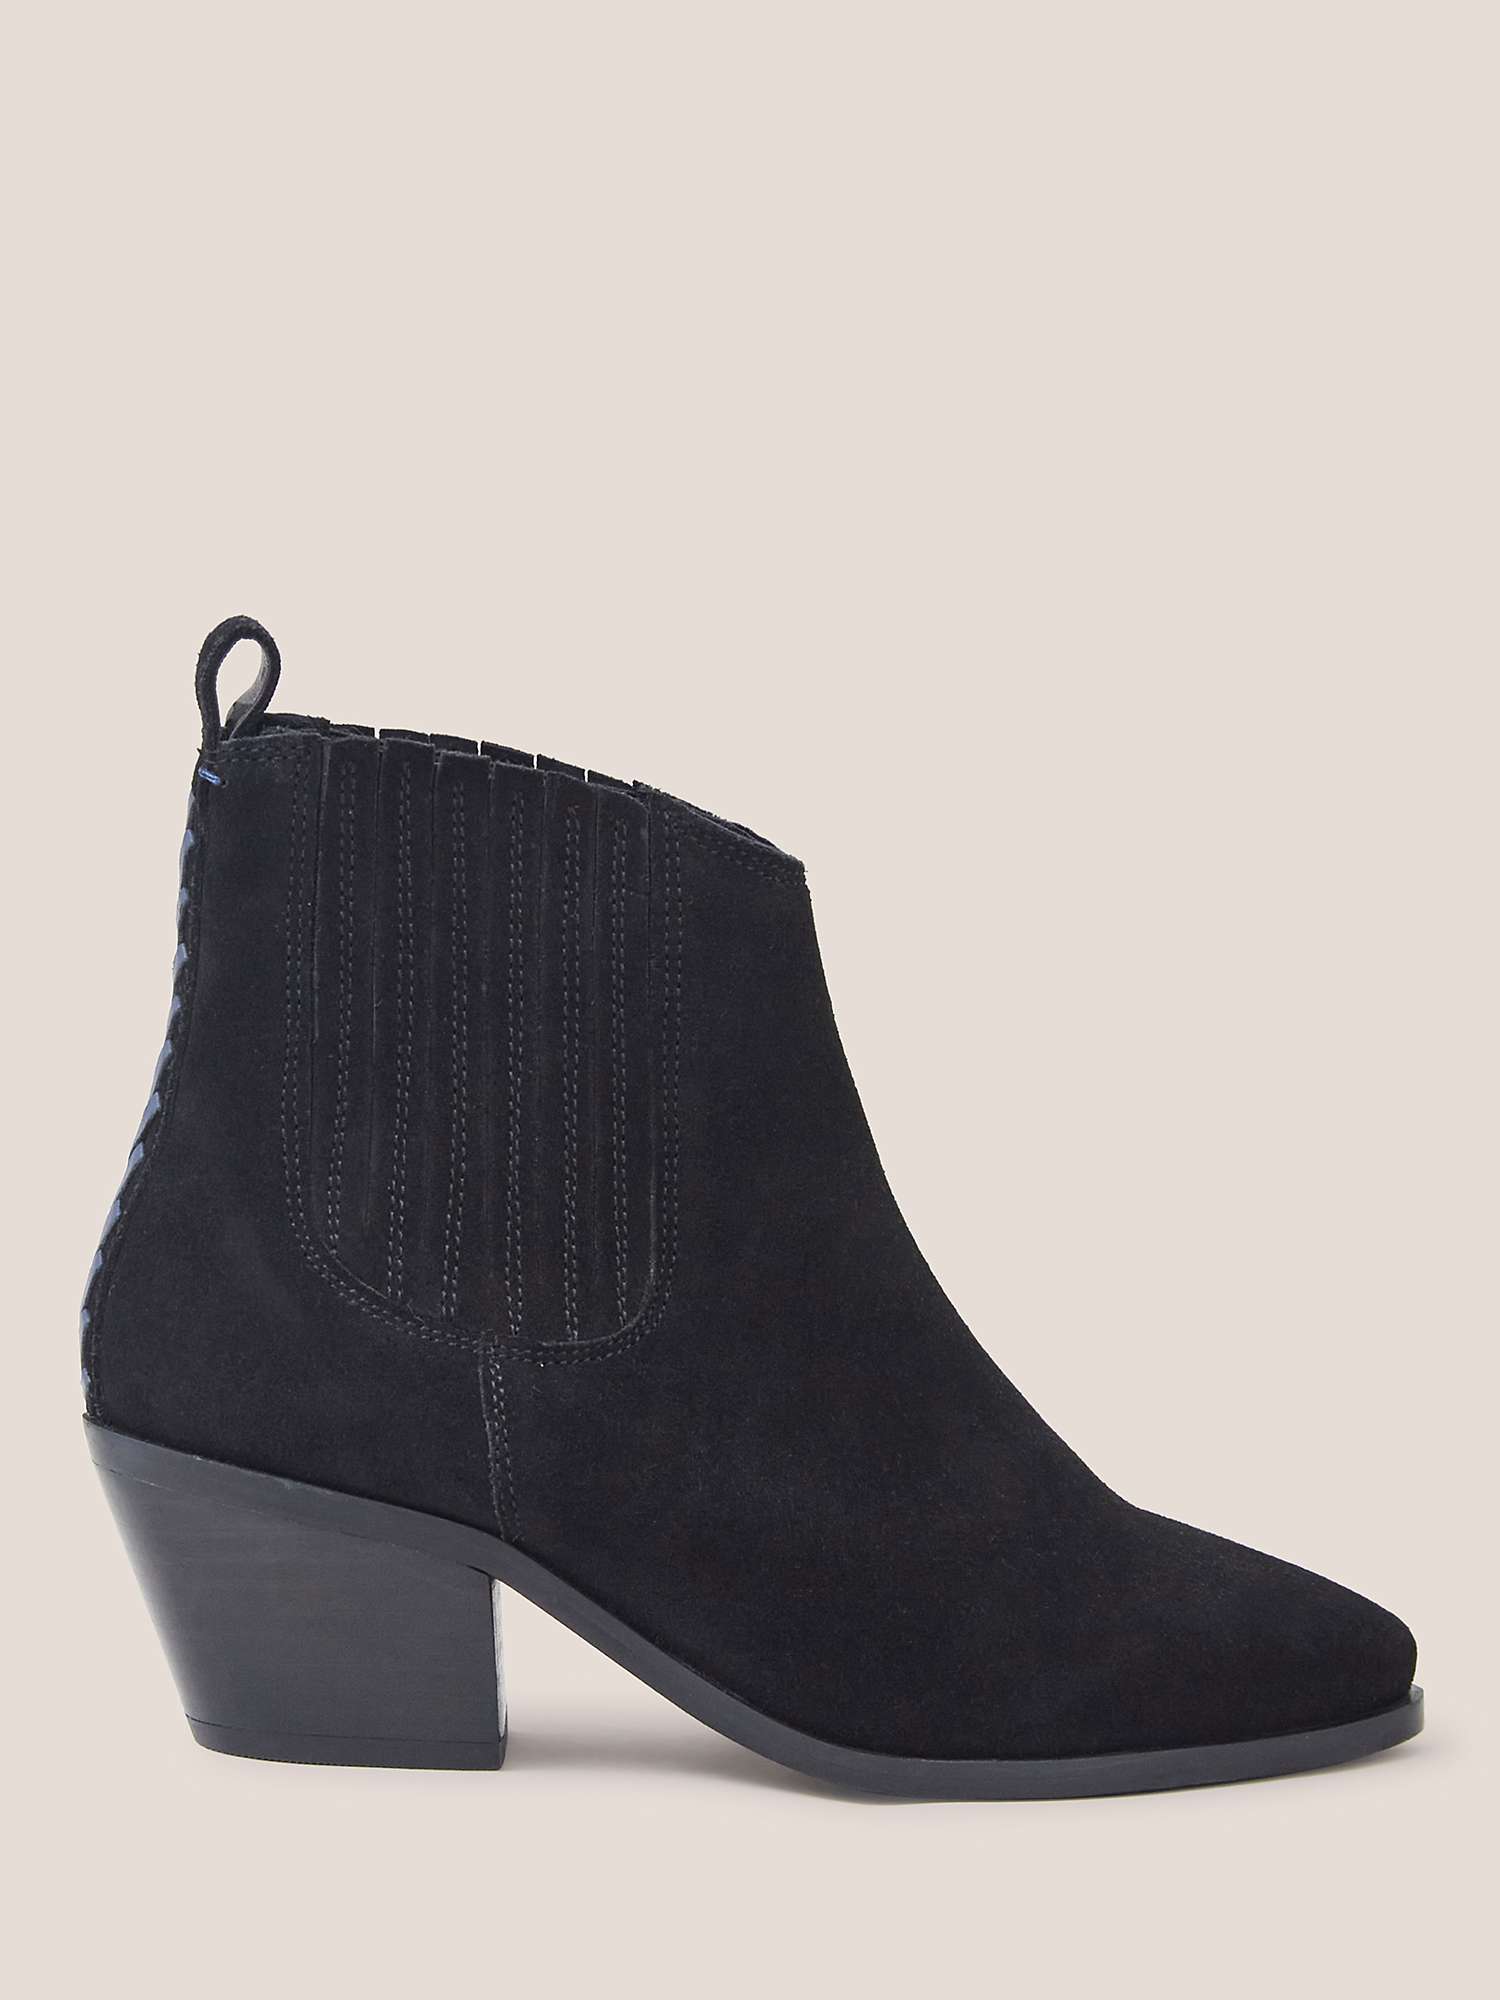 White Stuff Suede Ankle Boots, Black at John Lewis & Partners